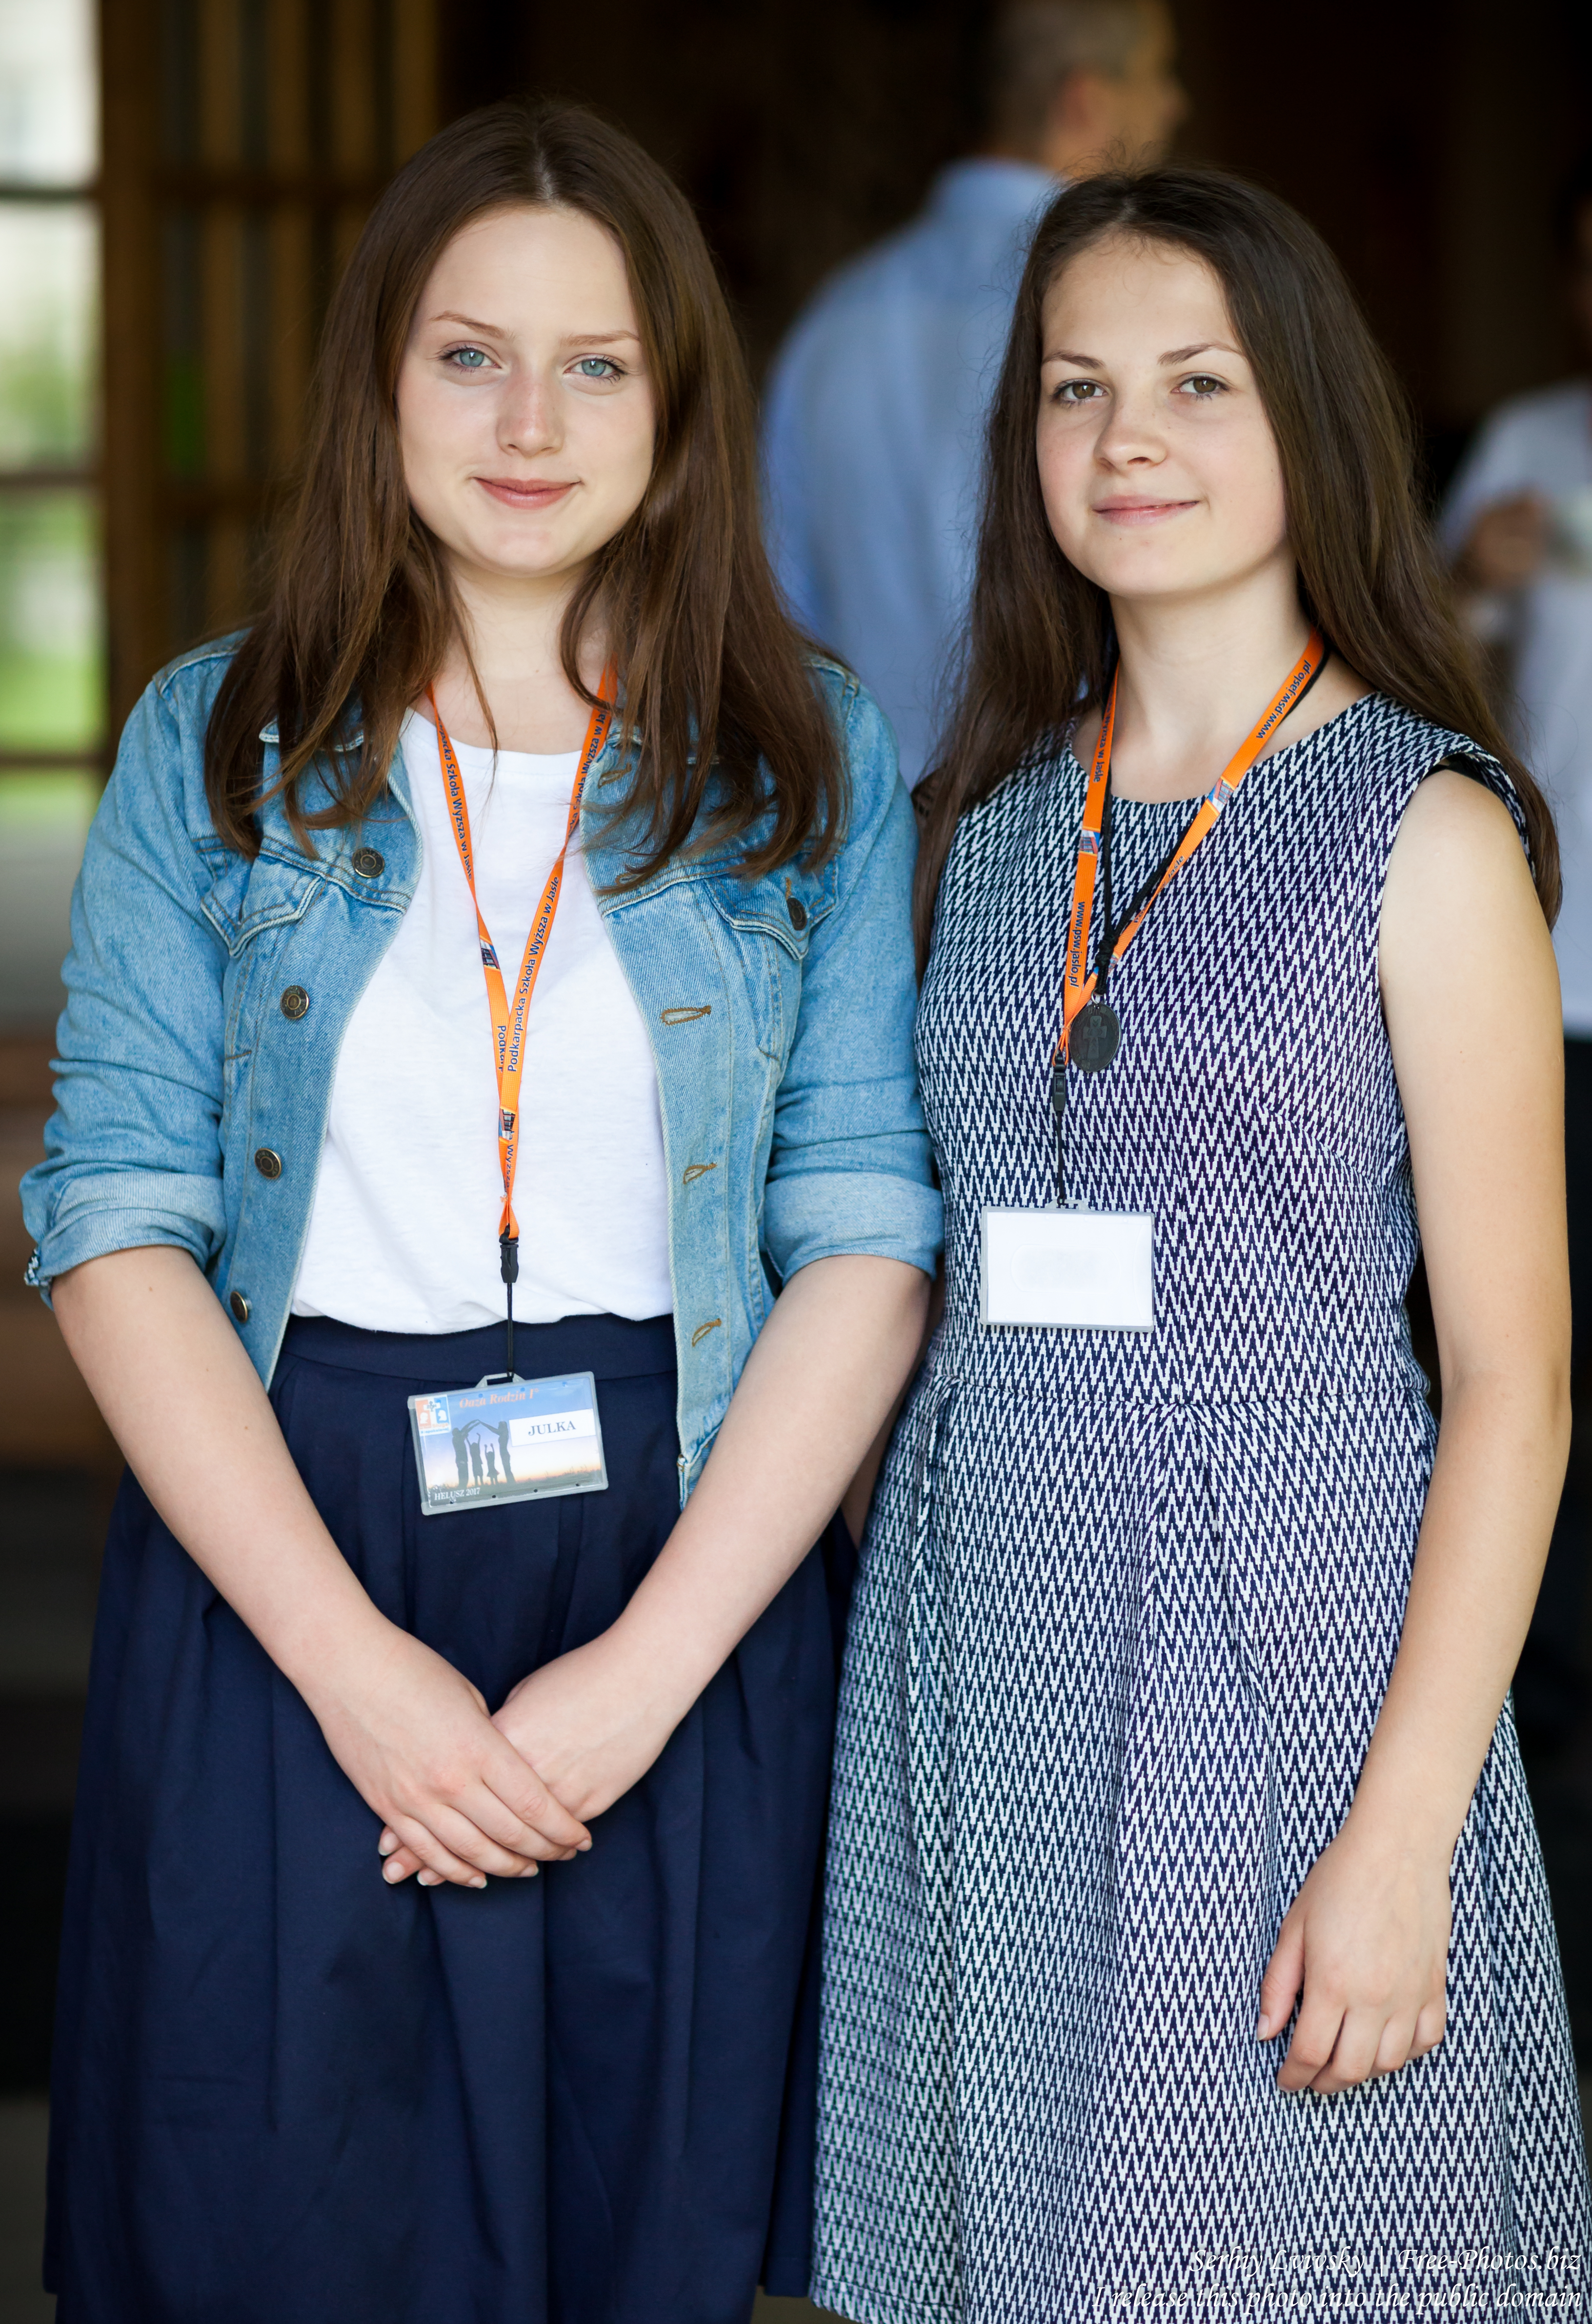 girls-animators at Catholic recollections in Poland in July 2017 photographed by Serhiy Lvivsky, picture 7